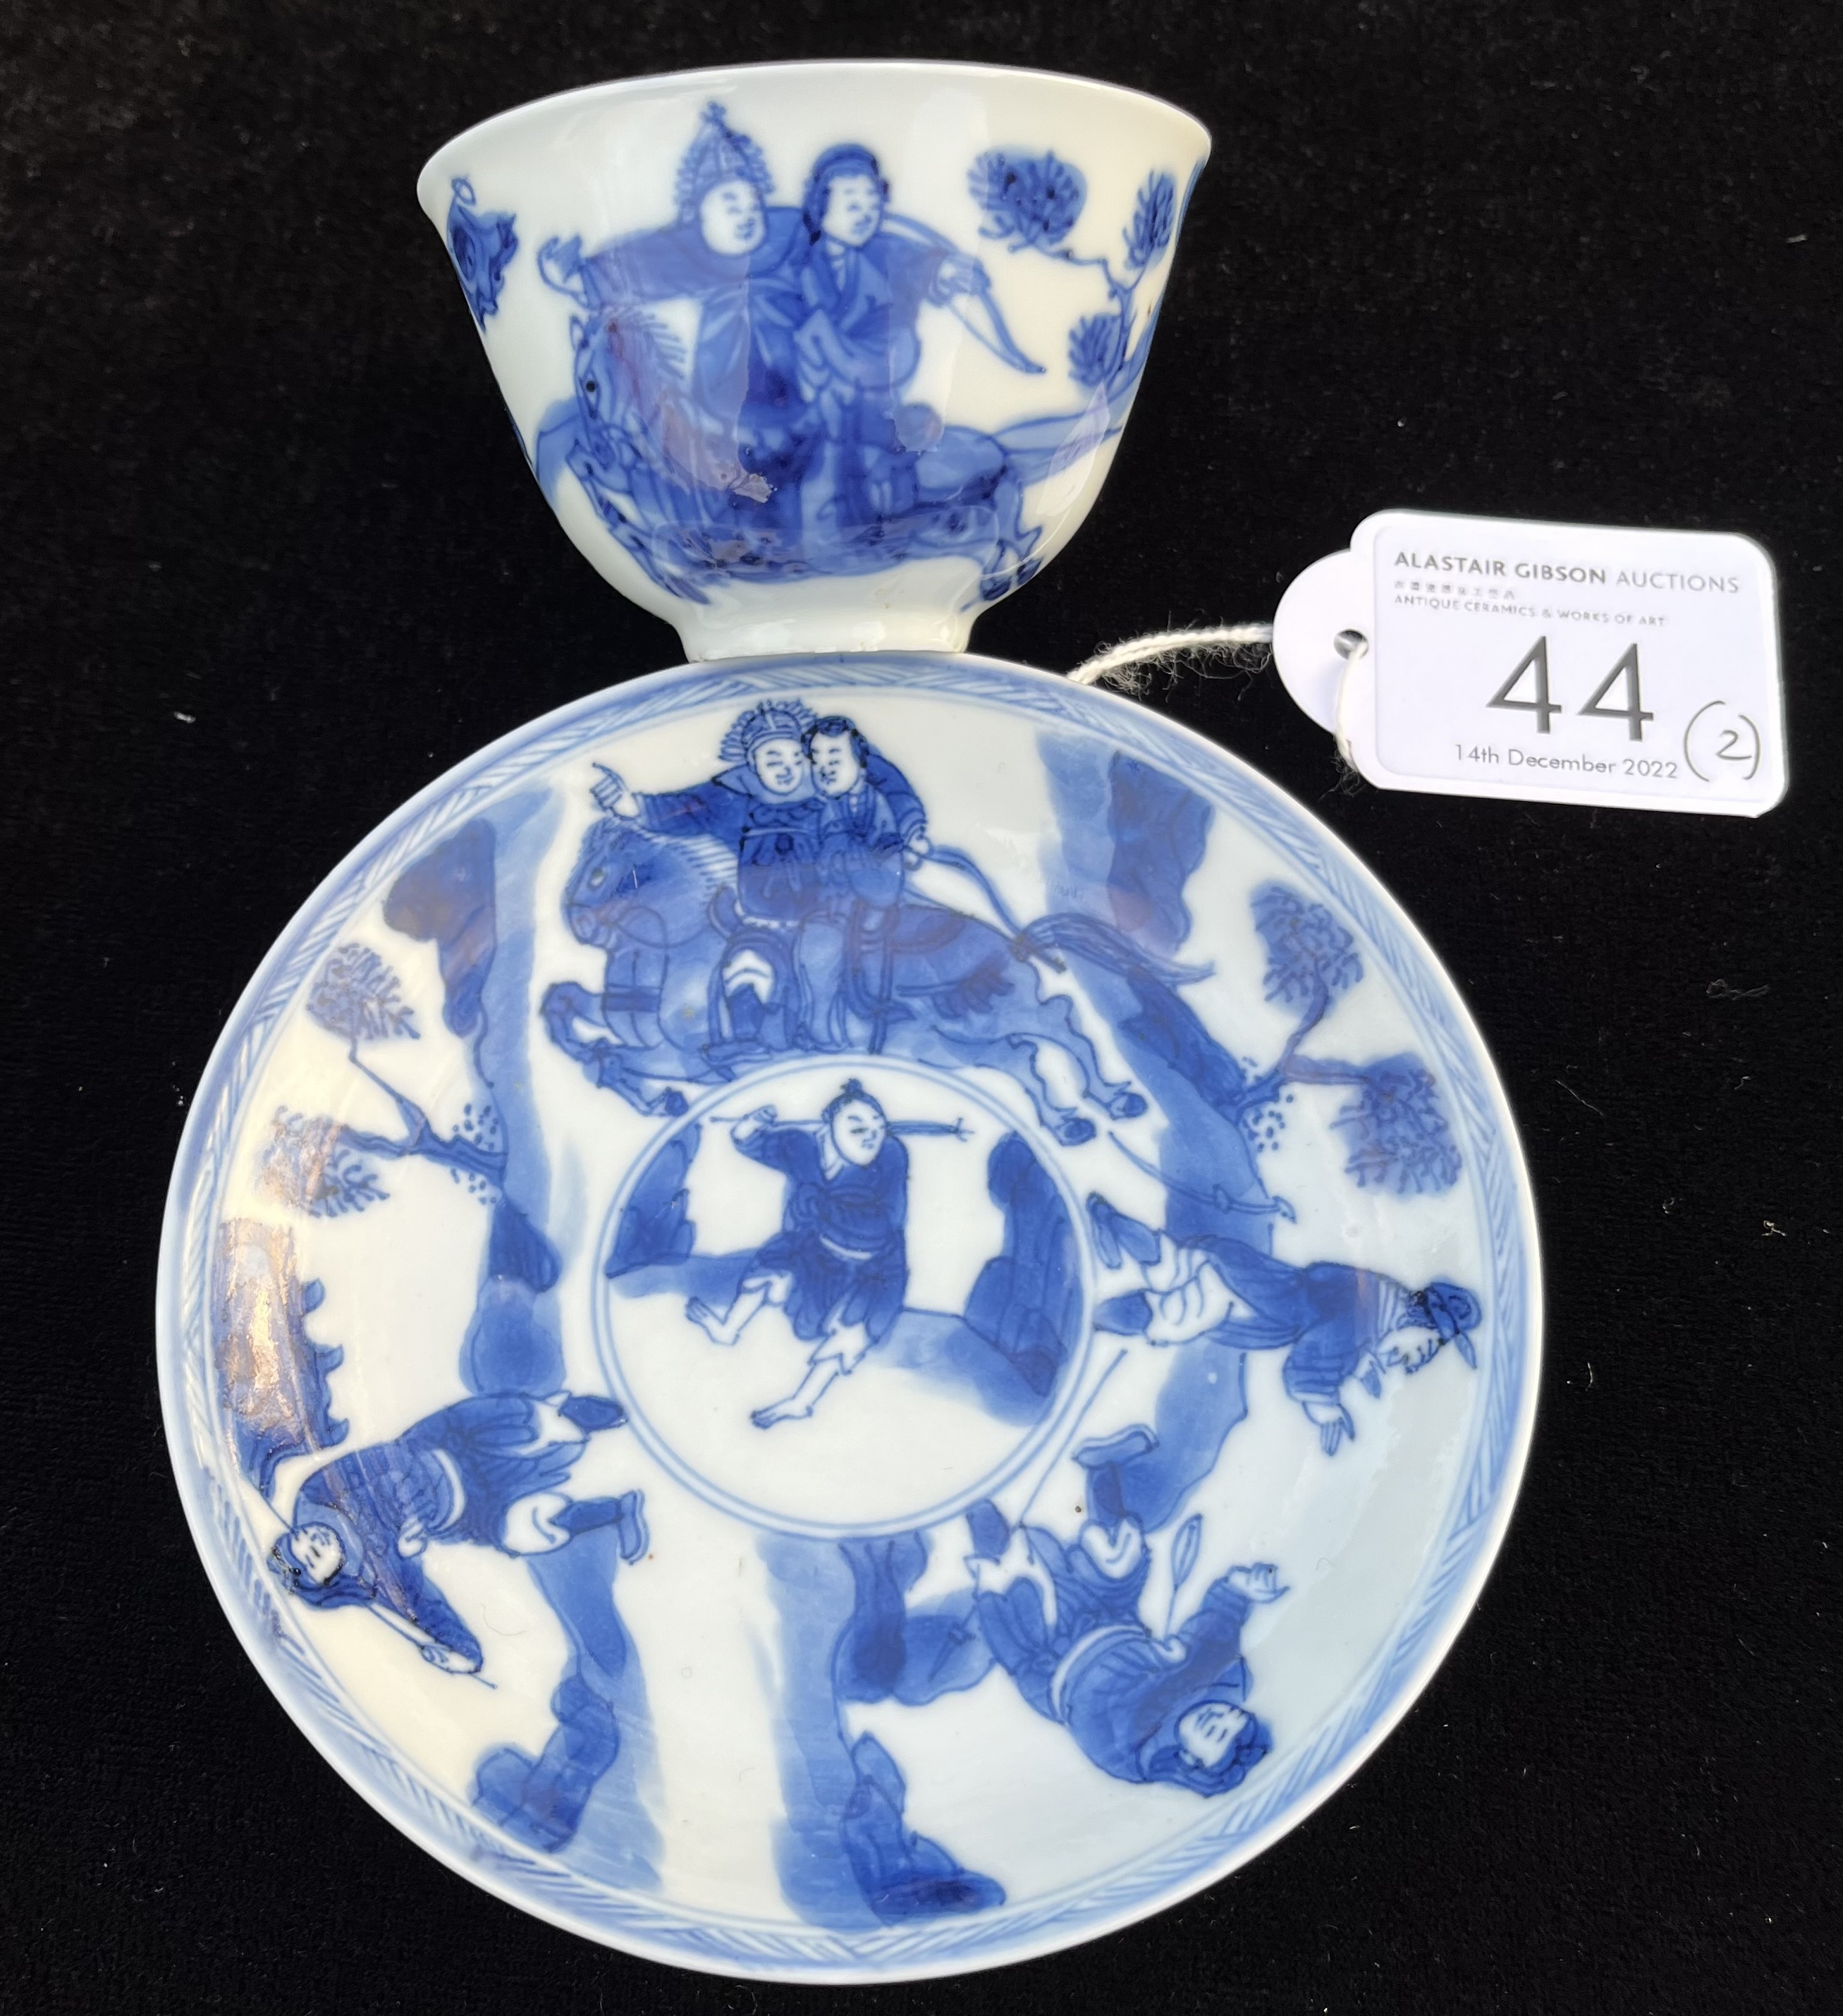 A CHINESE BLUE AND WHITE PORCELAIN TEA BOWL AND SAUCER, QING DYNASTY, KANGXI PERIOD, 1662 – 1722 - Image 3 of 7